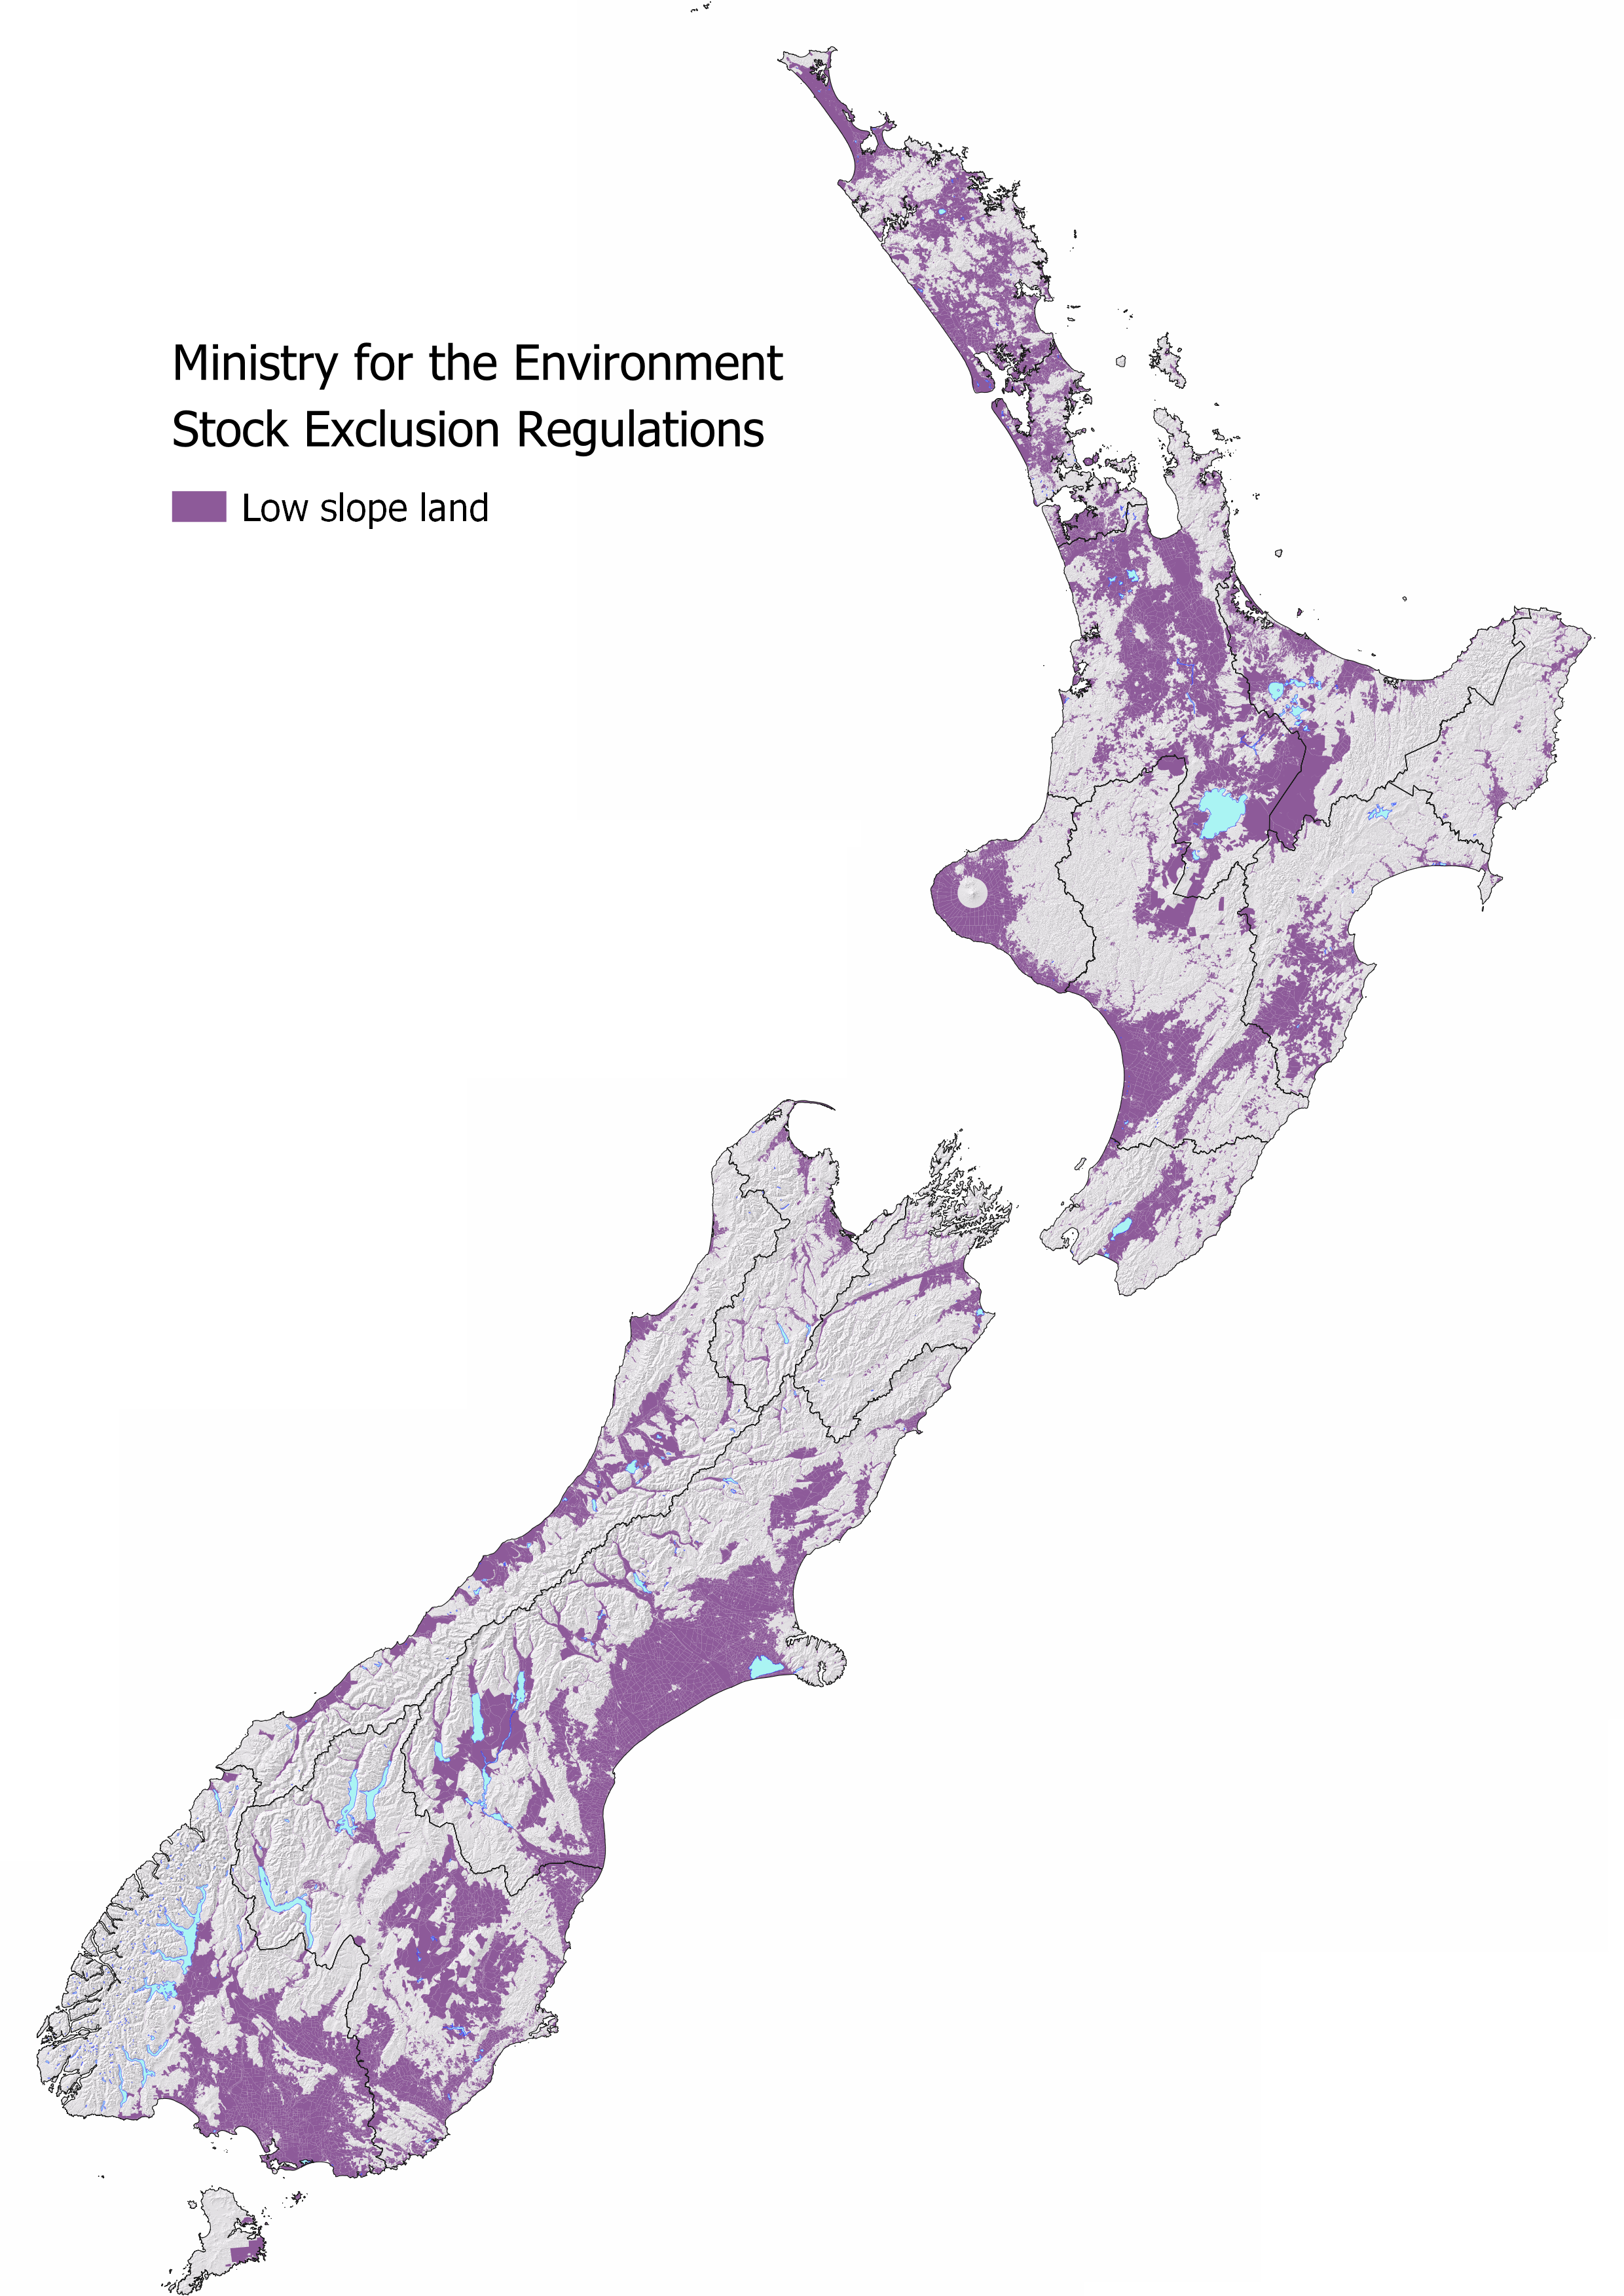 Colour-coded map of New Zealand showing the low-slope land where the Stock-Exclusion regulations apply.